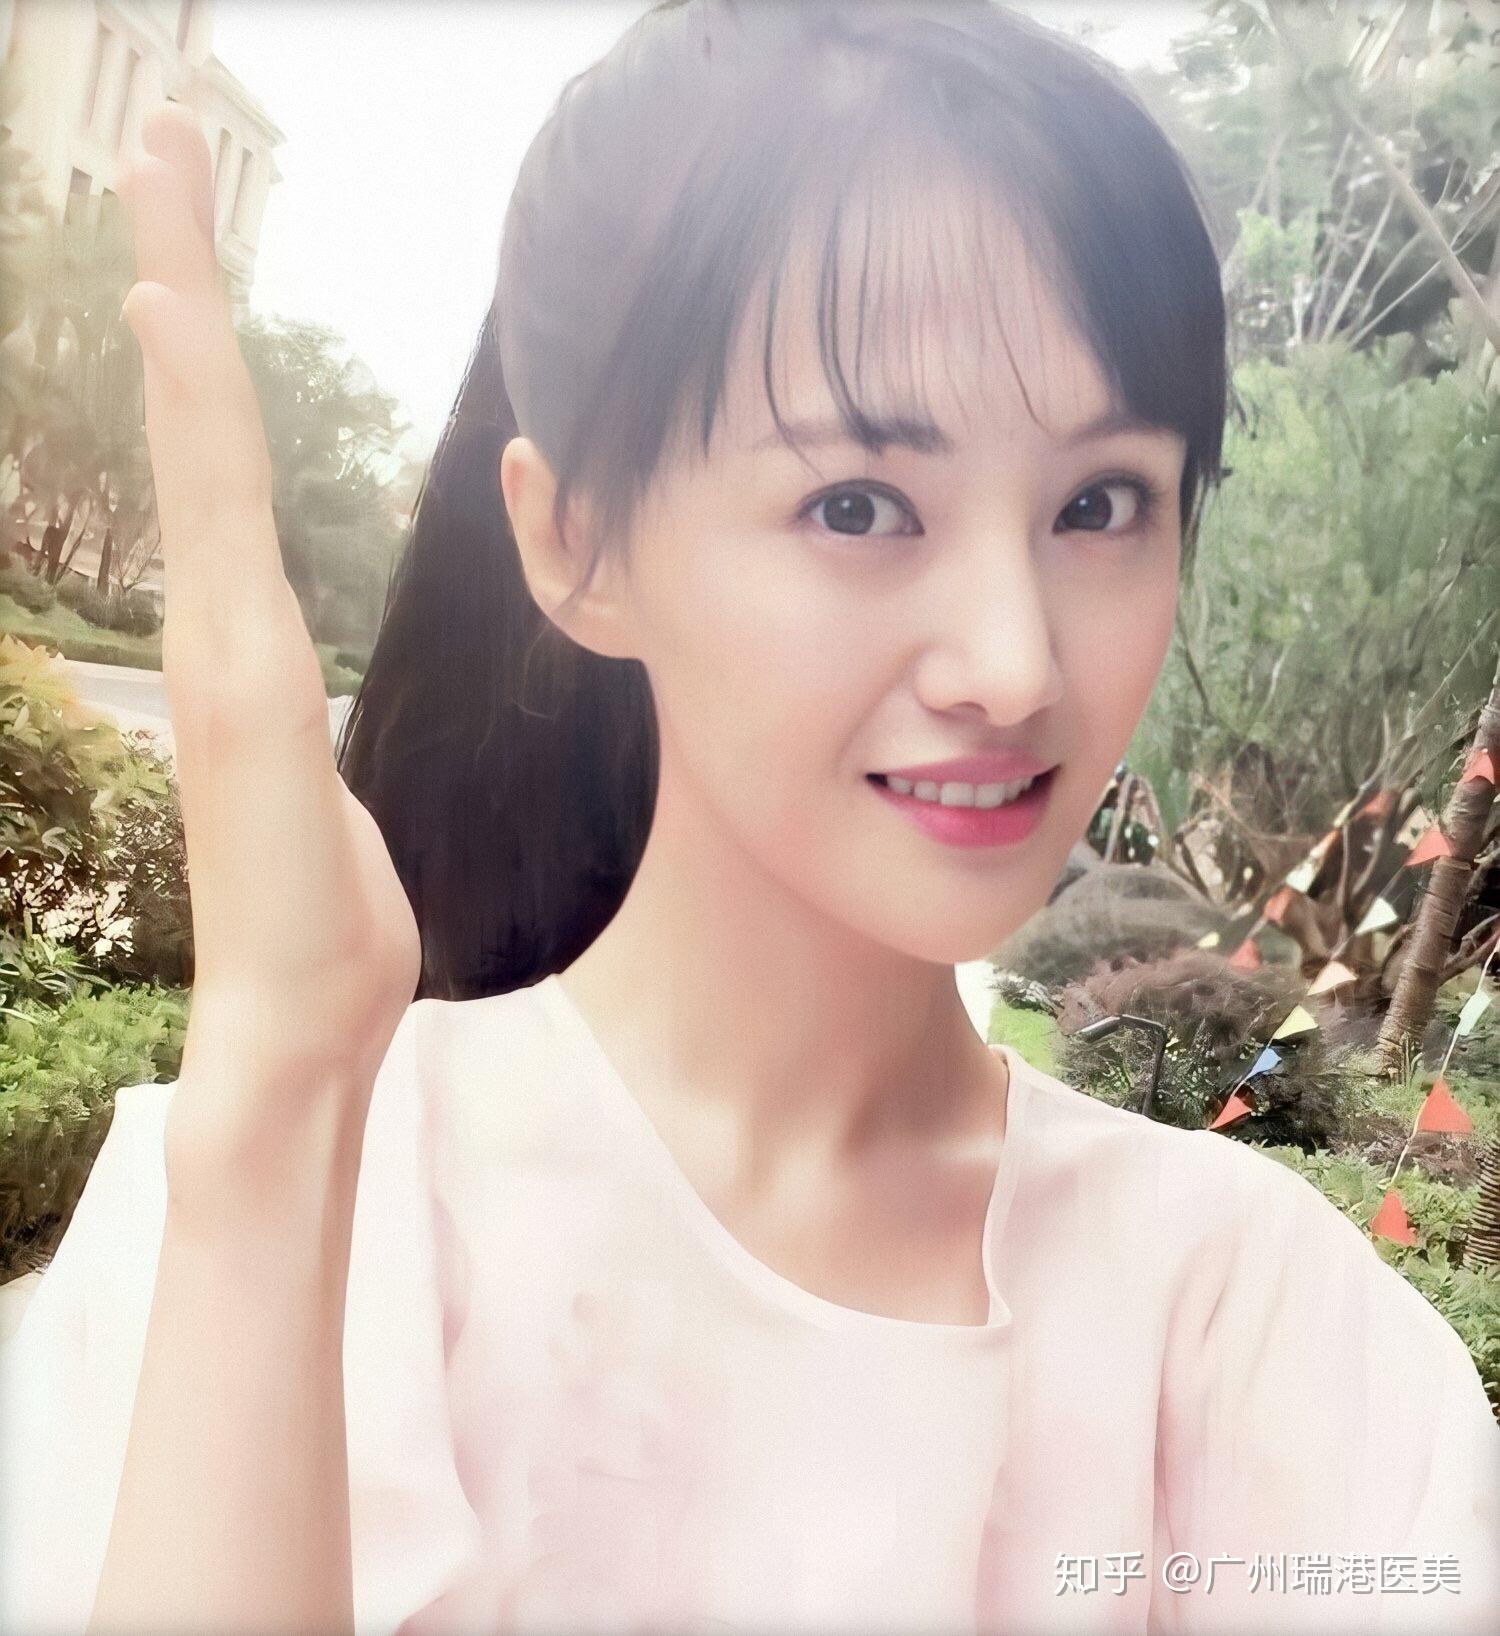 Zheng Shuang Warms Hearts Reading Fan Letters She's Kept for the Last ...